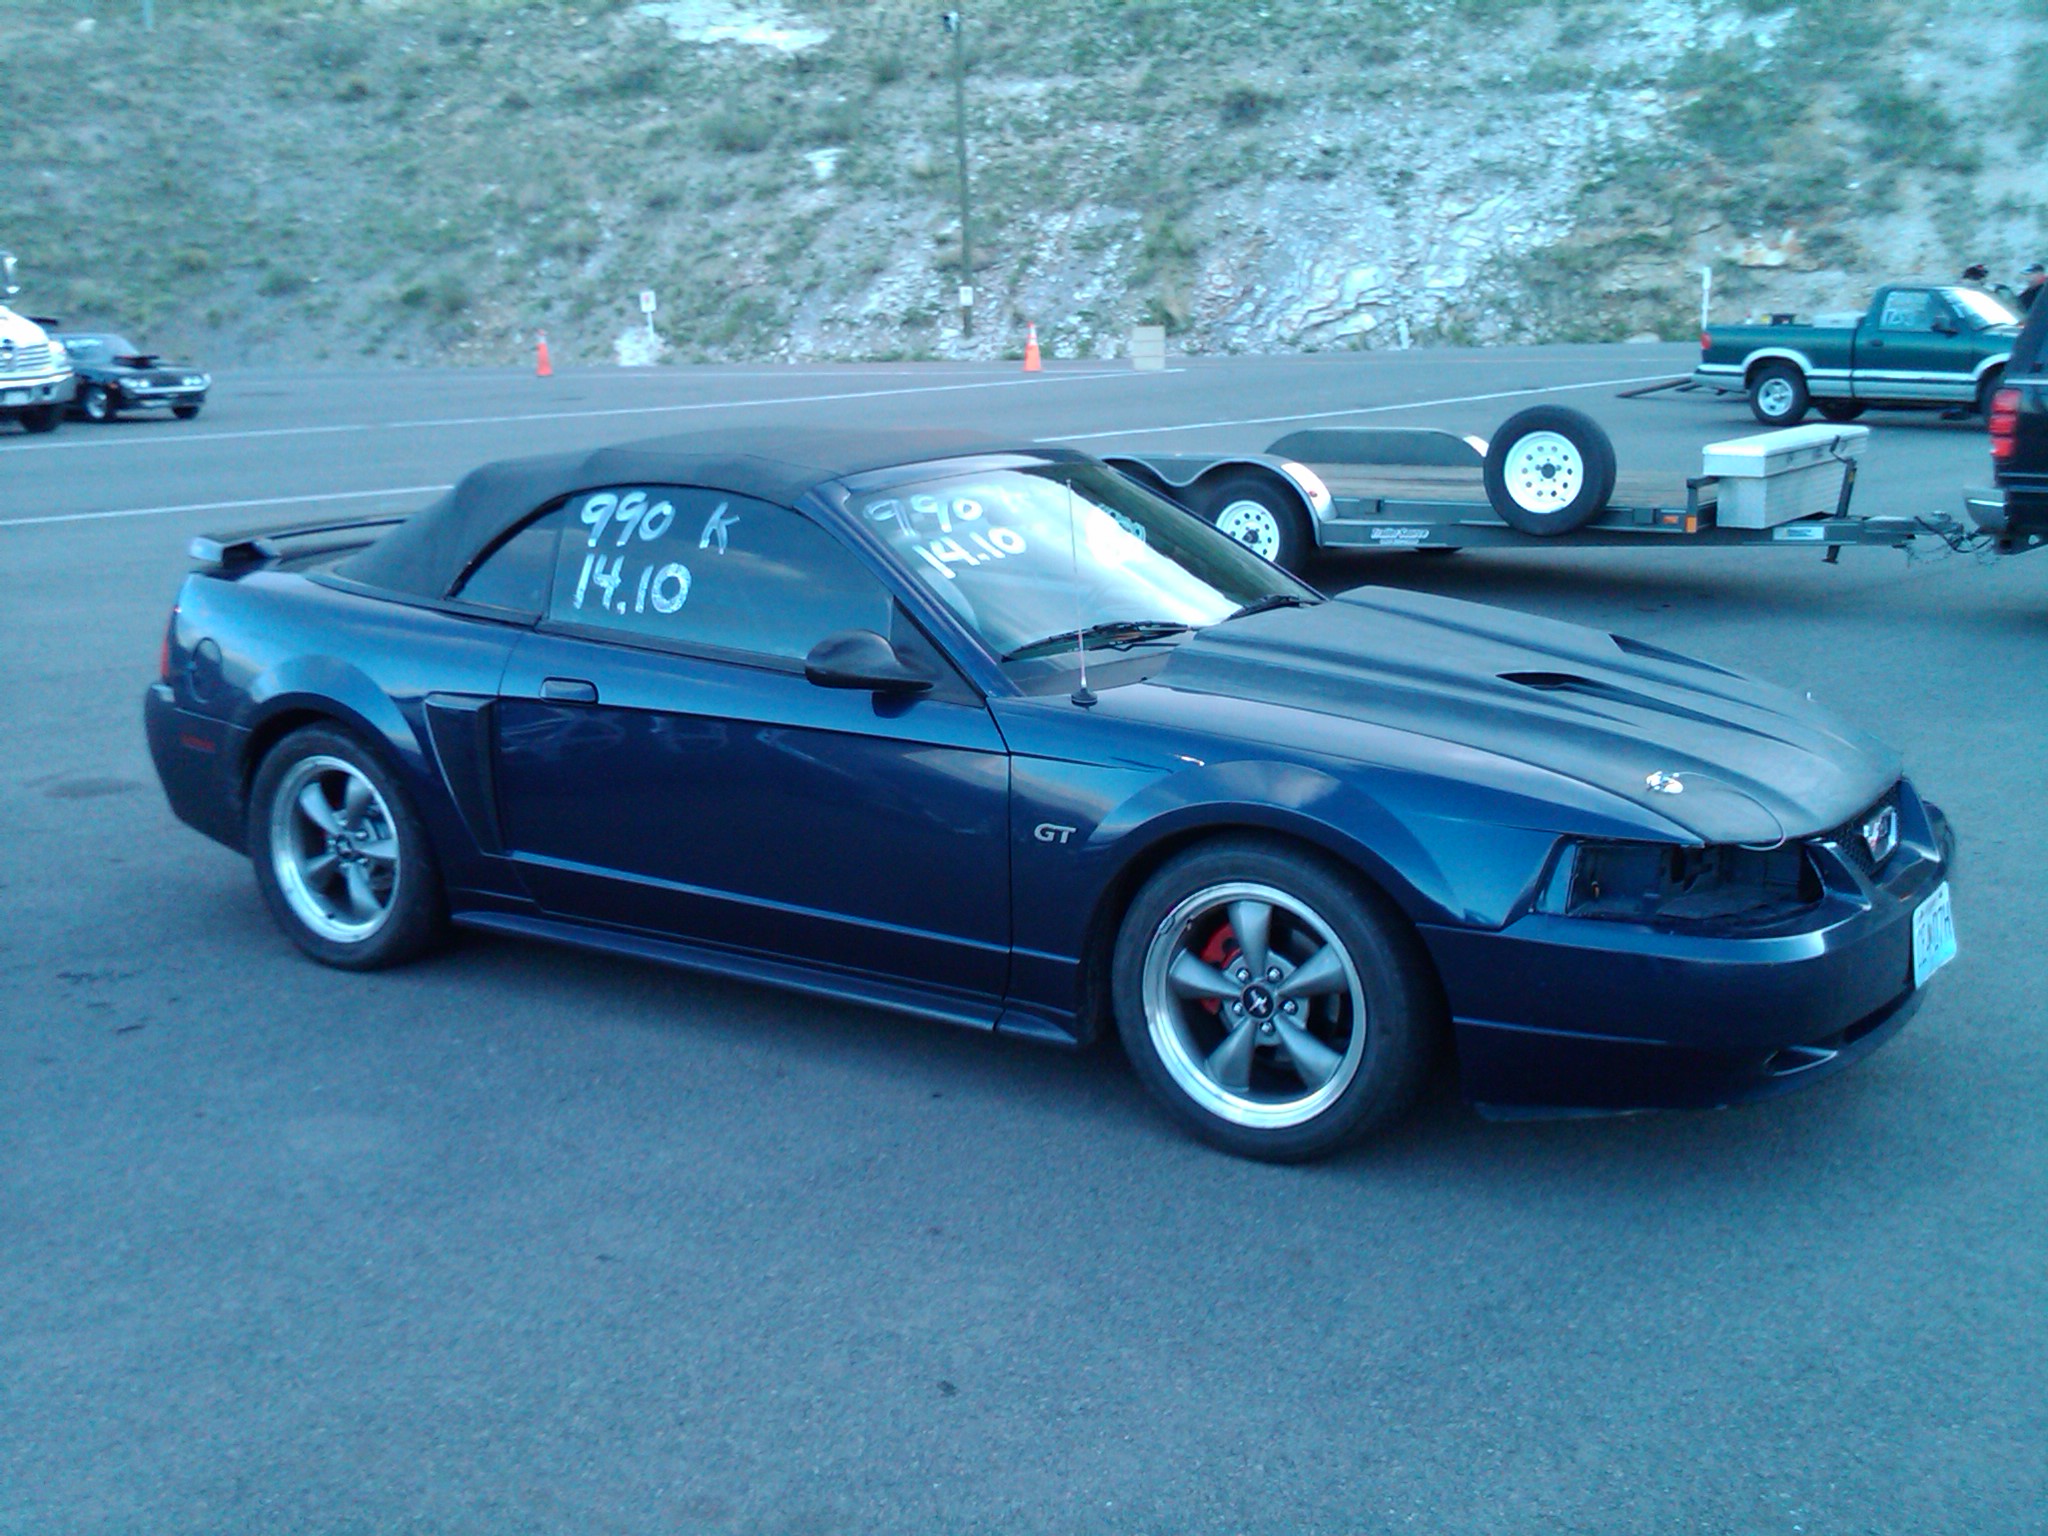 2003 Ford mustang gt quarter mile #8